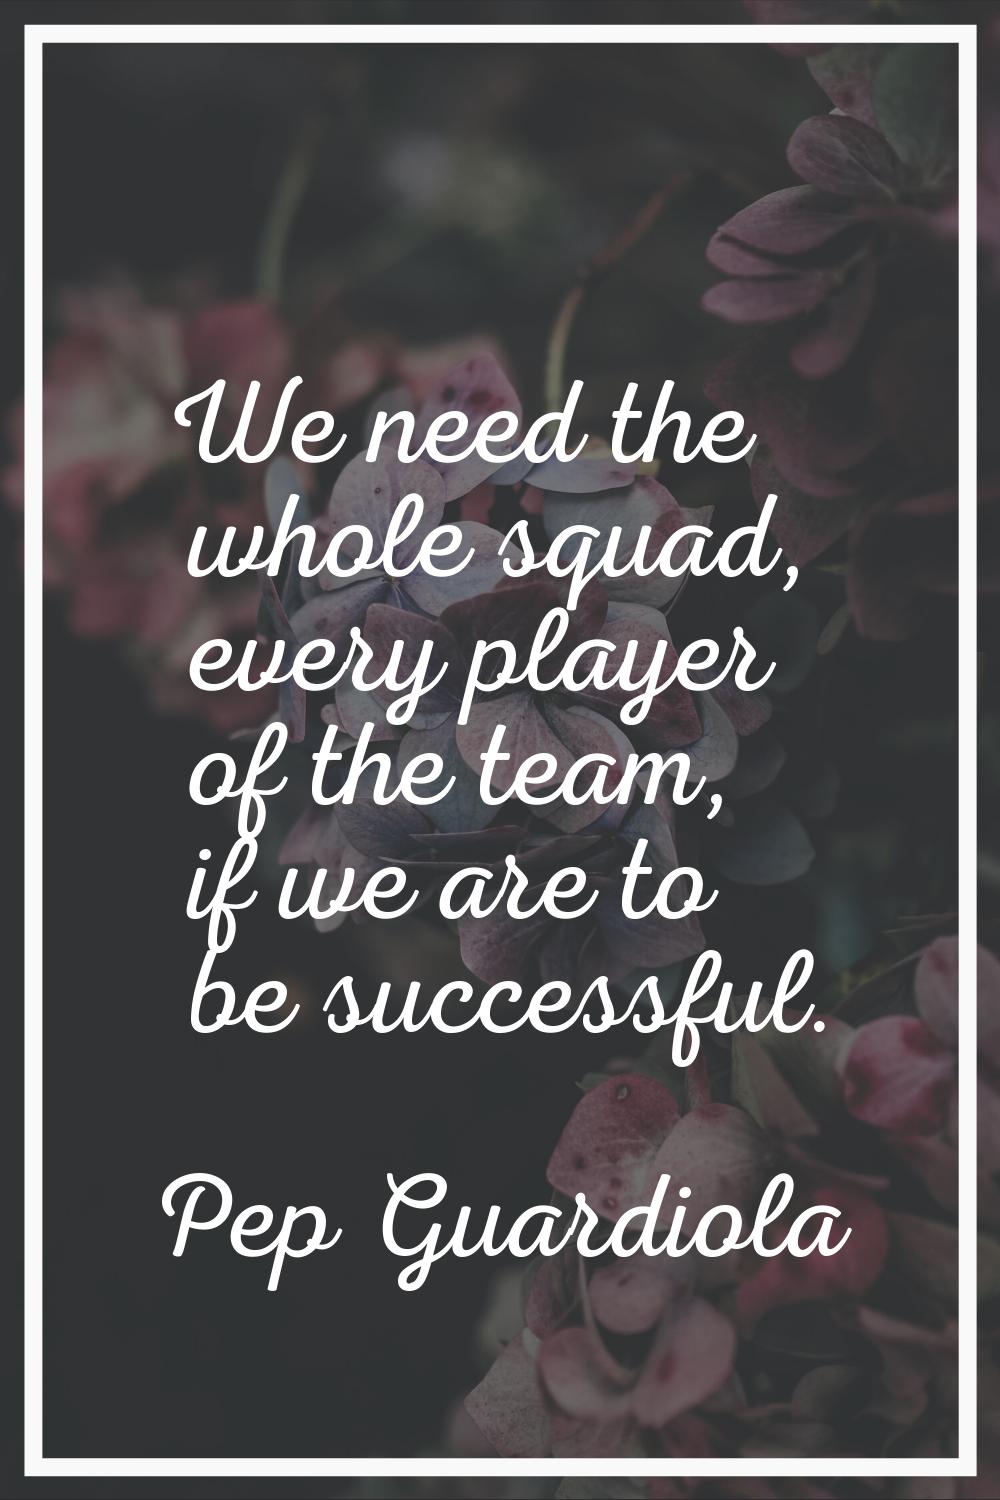 We need the whole squad, every player of the team, if we are to be successful.